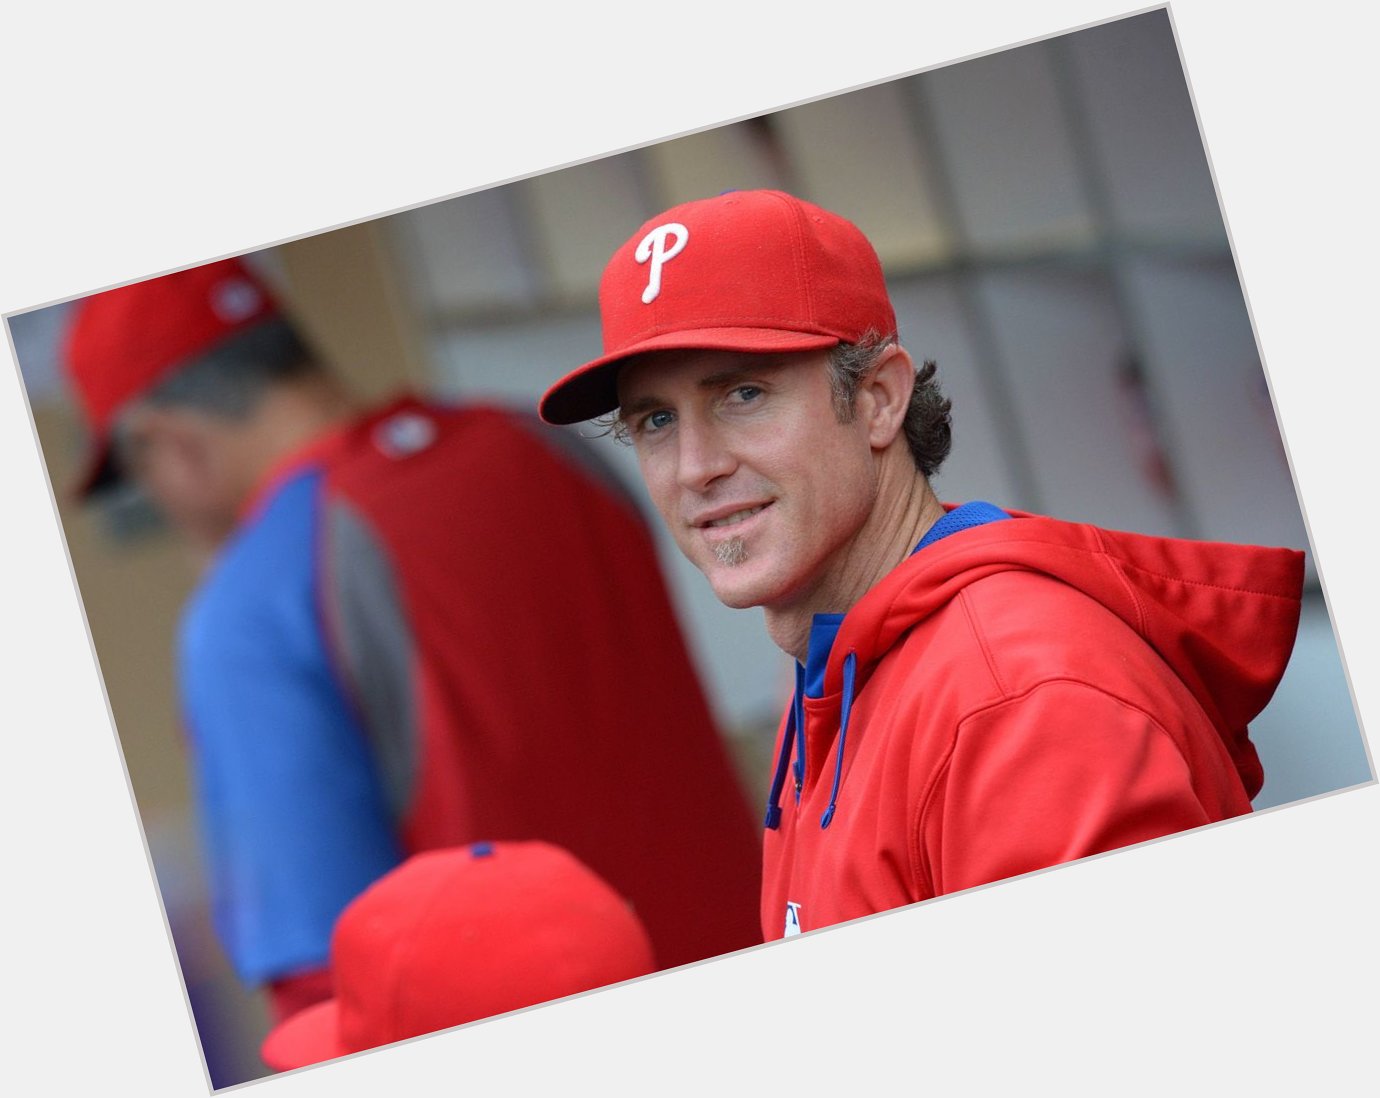 Happy 40th Birthday to former second baseman/recently retired, Chase Utley!   